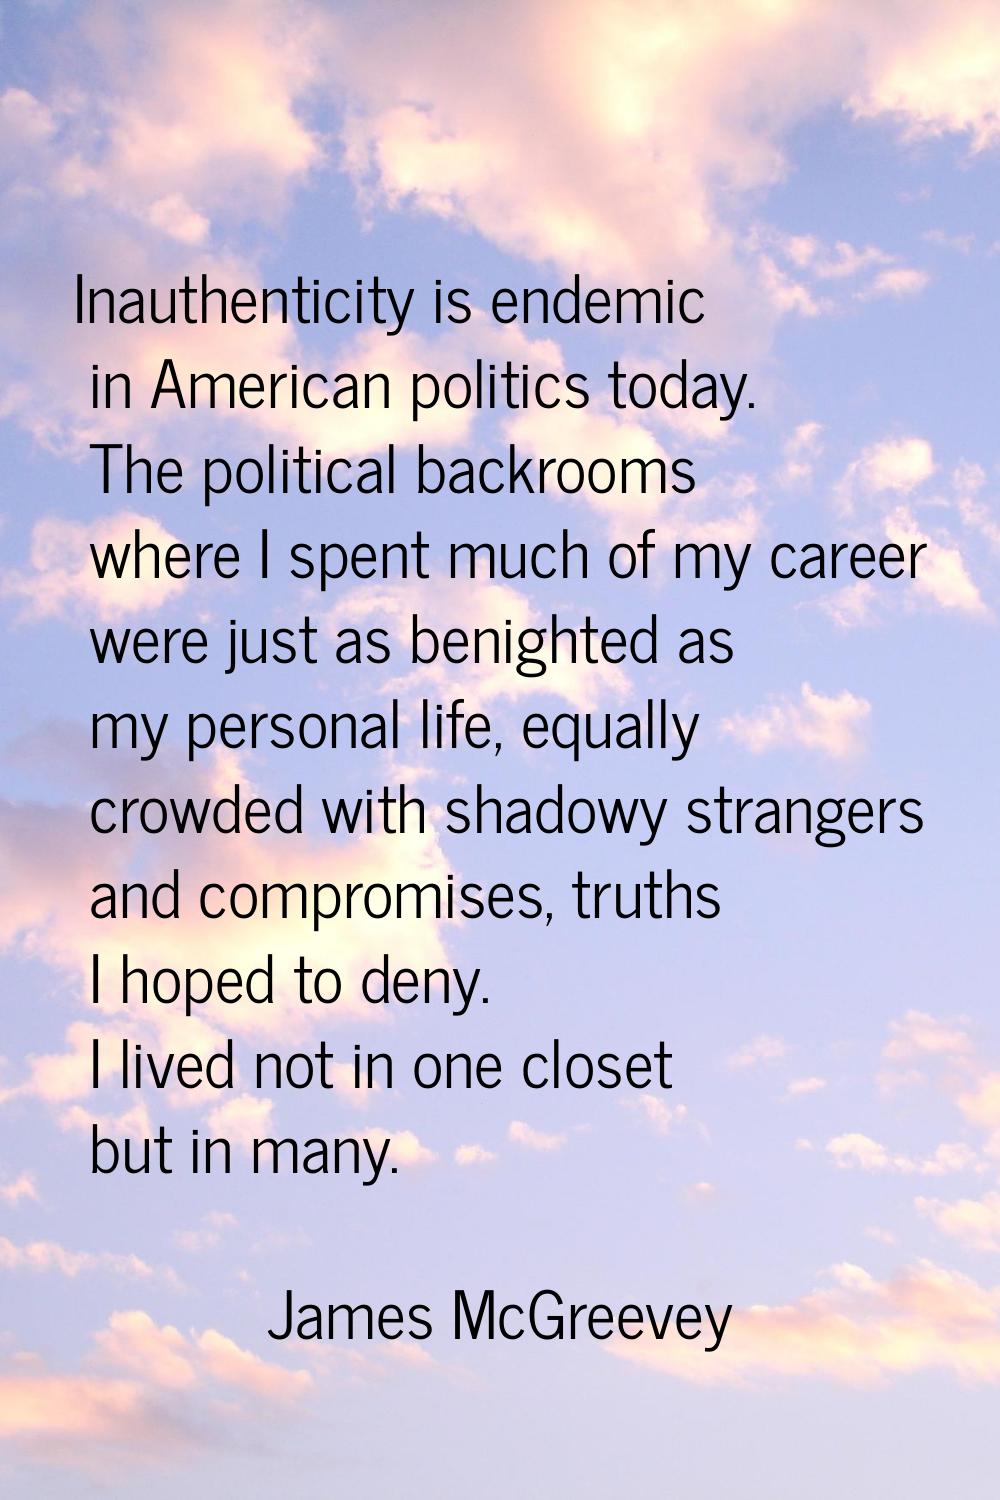 Inauthenticity is endemic in American politics today. The political backrooms where I spent much of